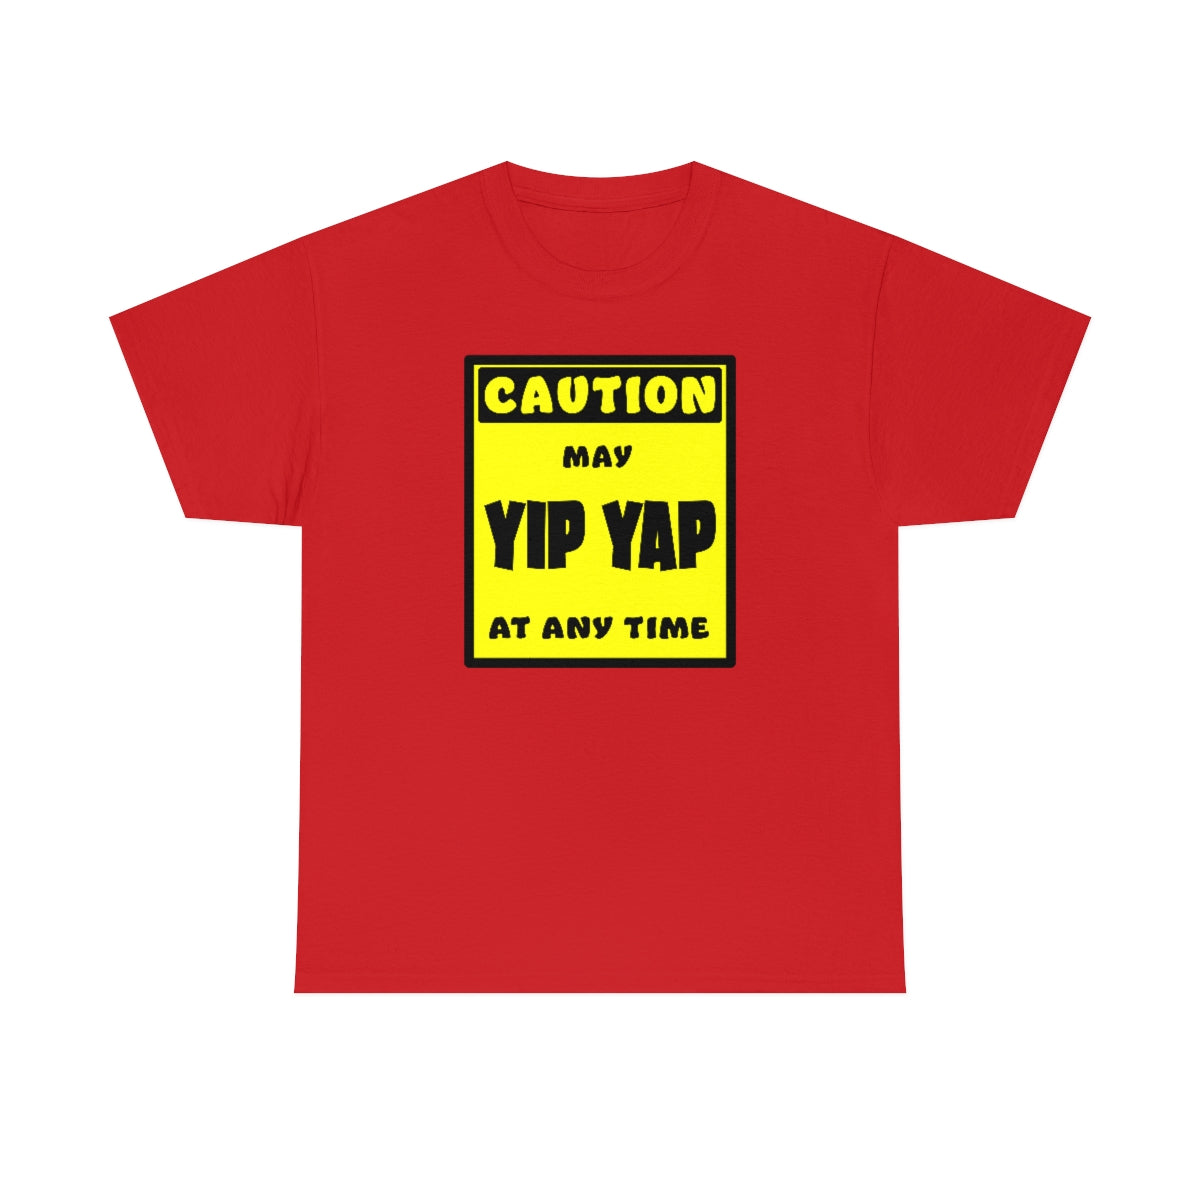 CAUTION! May Yip Yap at any time! - T-Shirt T-Shirt AFLT-Whootorca Red S 